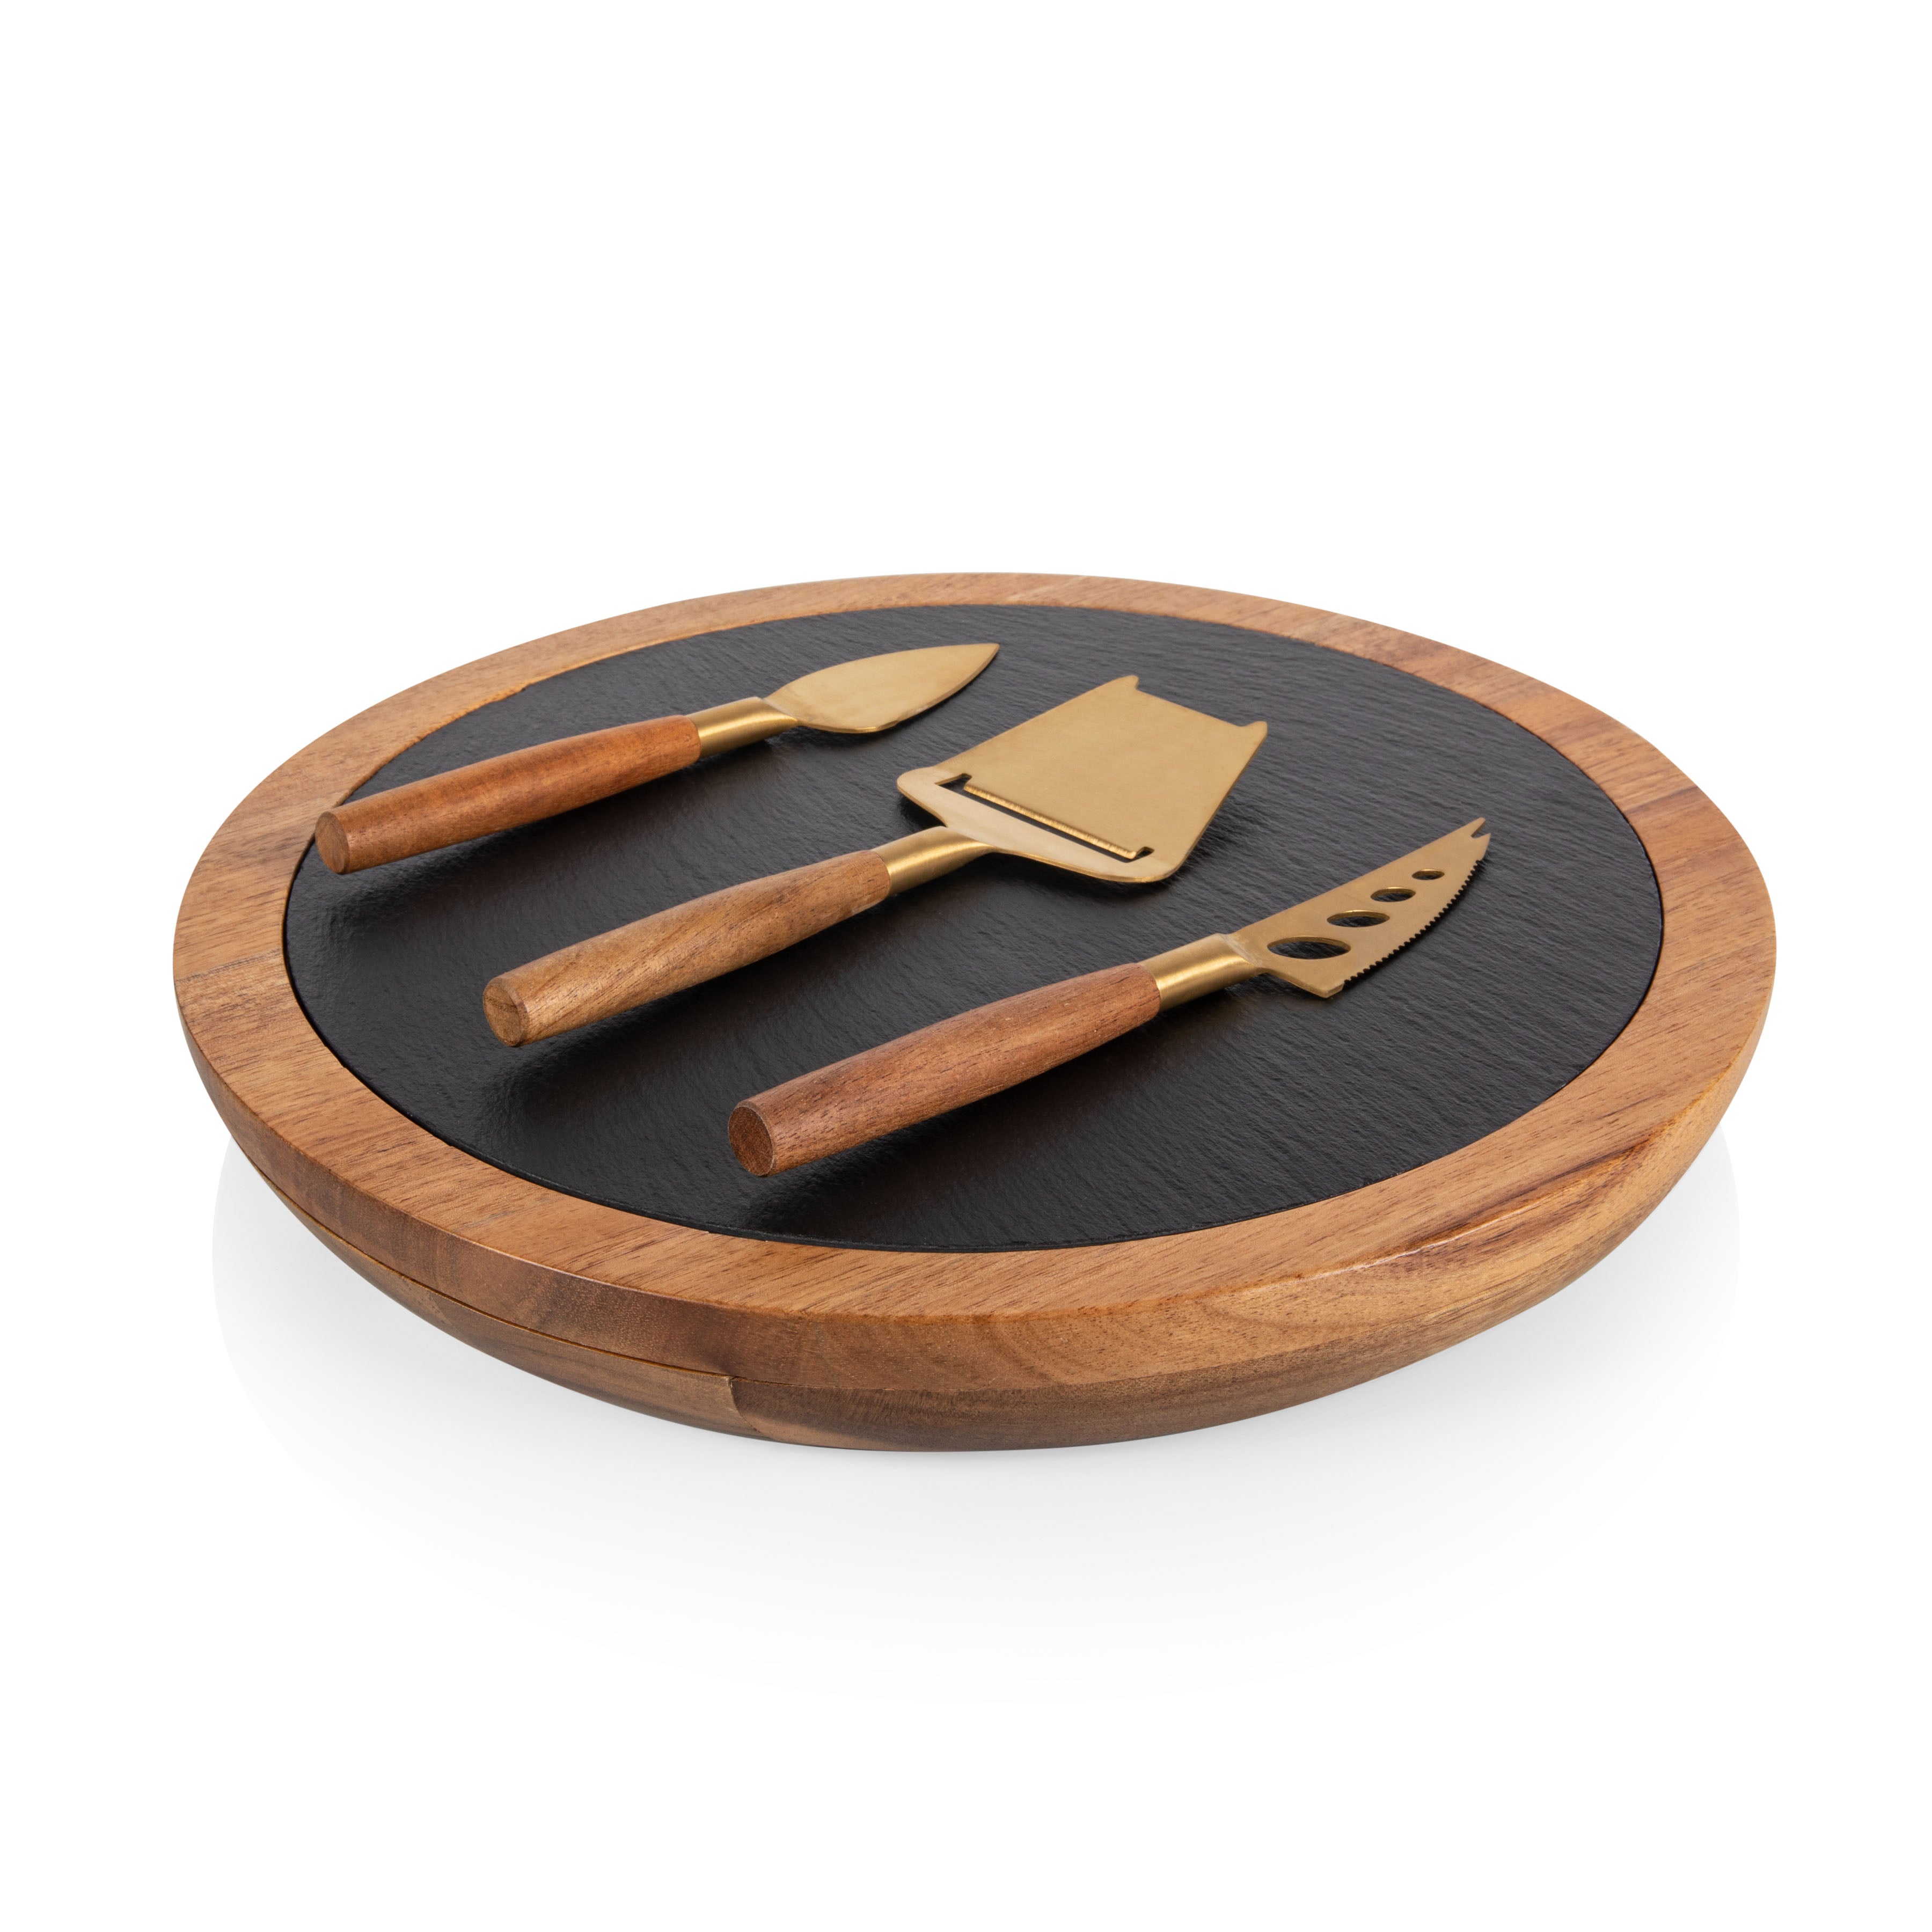 Colorado Rockies - Insignia Acacia and Slate Serving Board with Cheese Tools